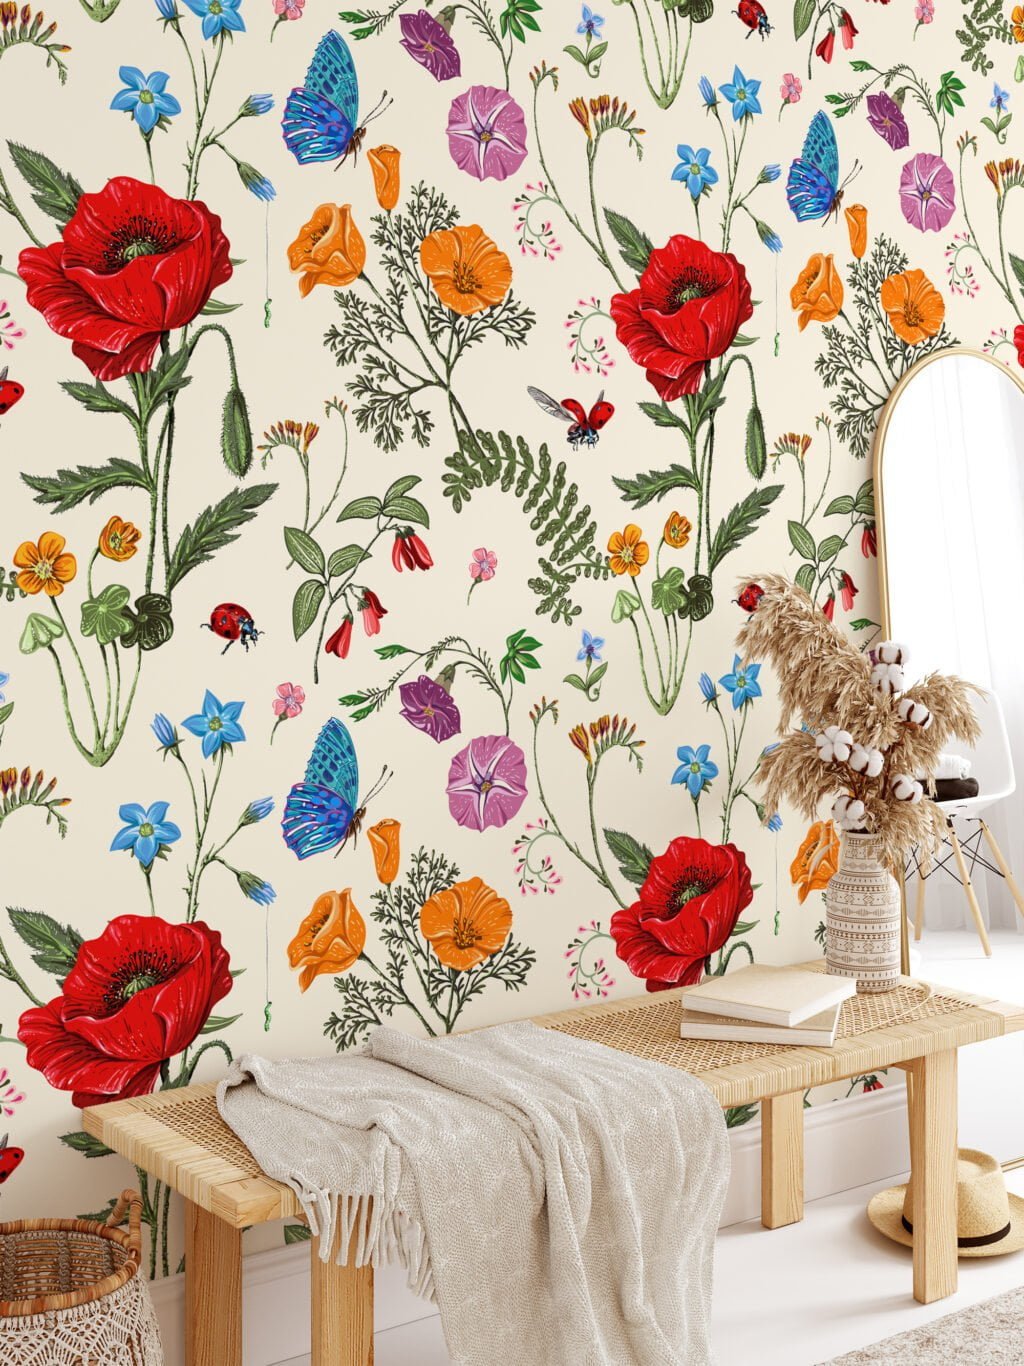 Floral Illustration With Bugs Wallpaper, Vintage Garden Symphony Peel & Stick Wall Mural